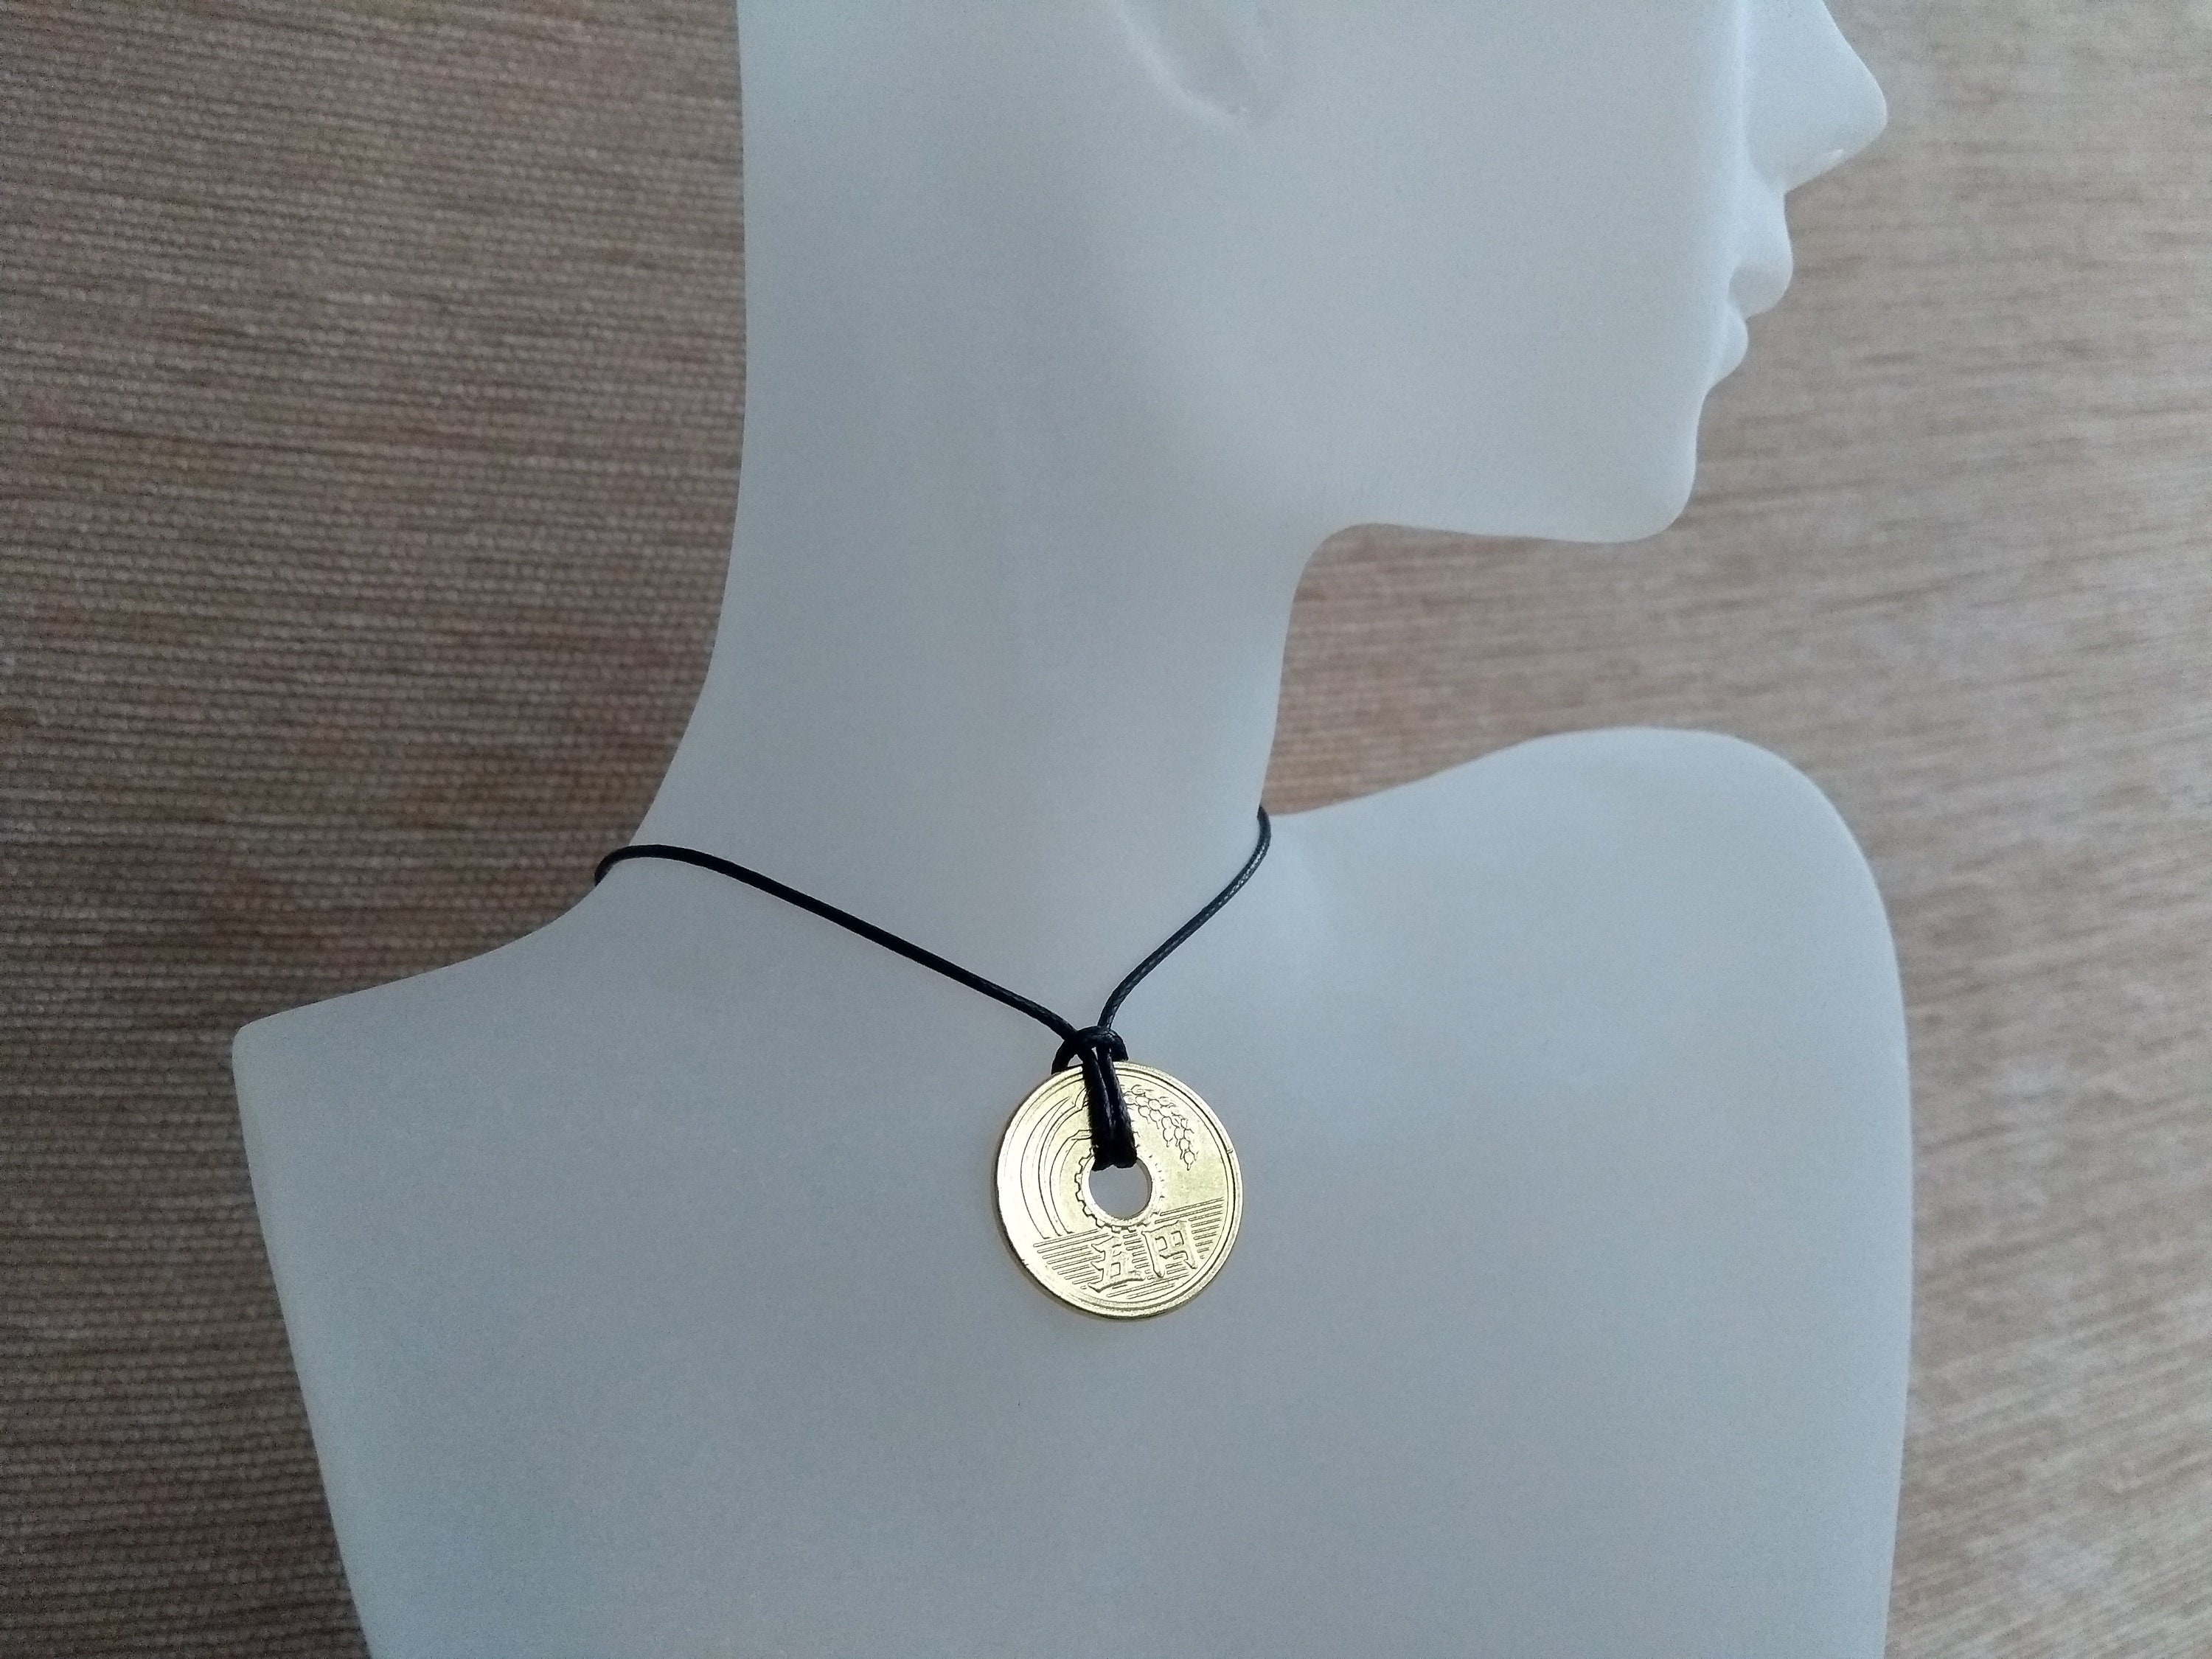 1958 Japanese 5 Yen Pendant Japan lucky coin necklace Coin with a hole 64th Birthday gift 64th Anniversary present for husband or wife